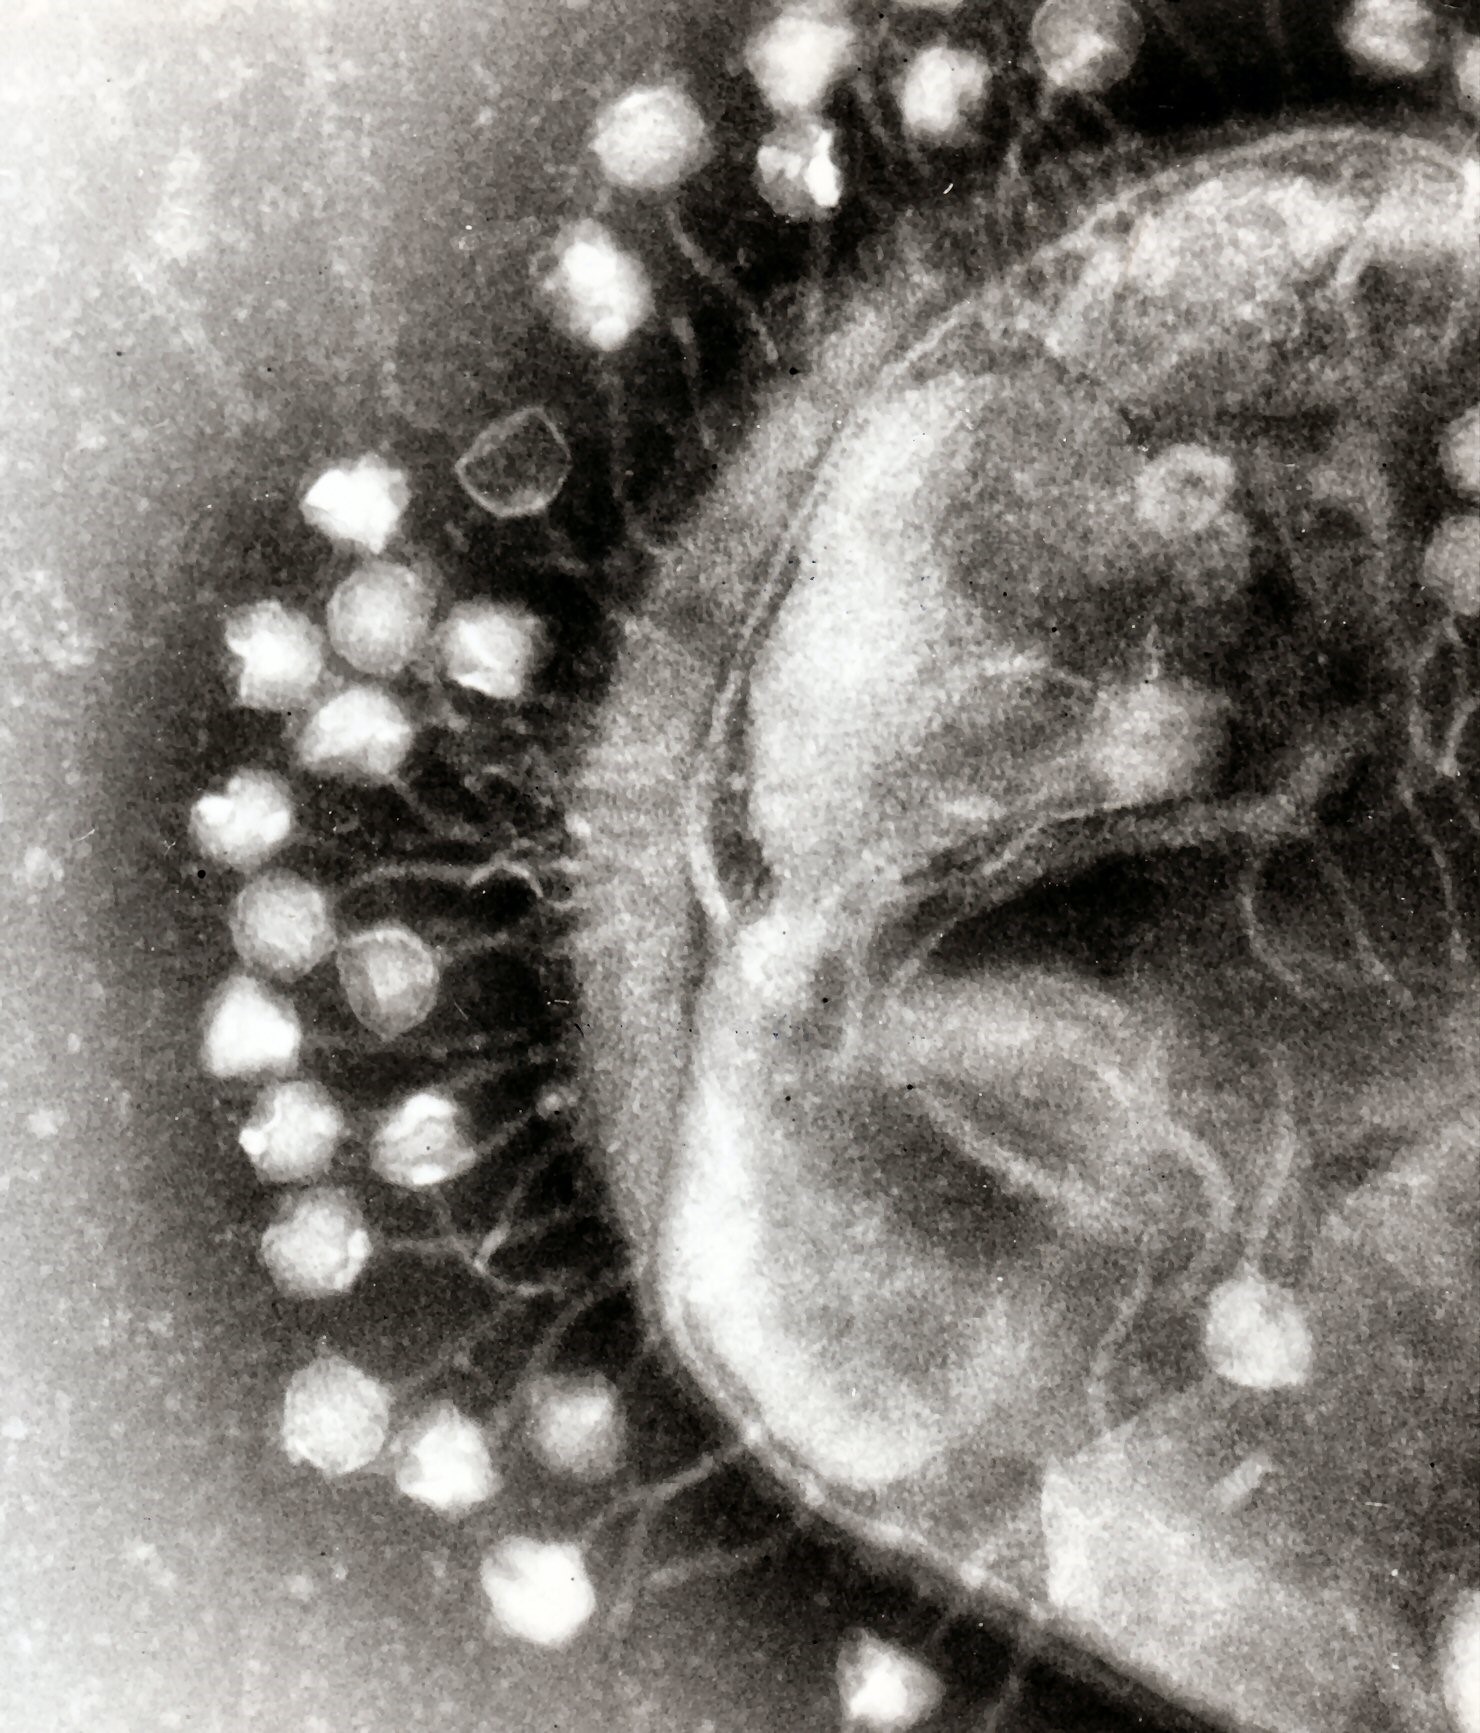 em of phages on bacterium